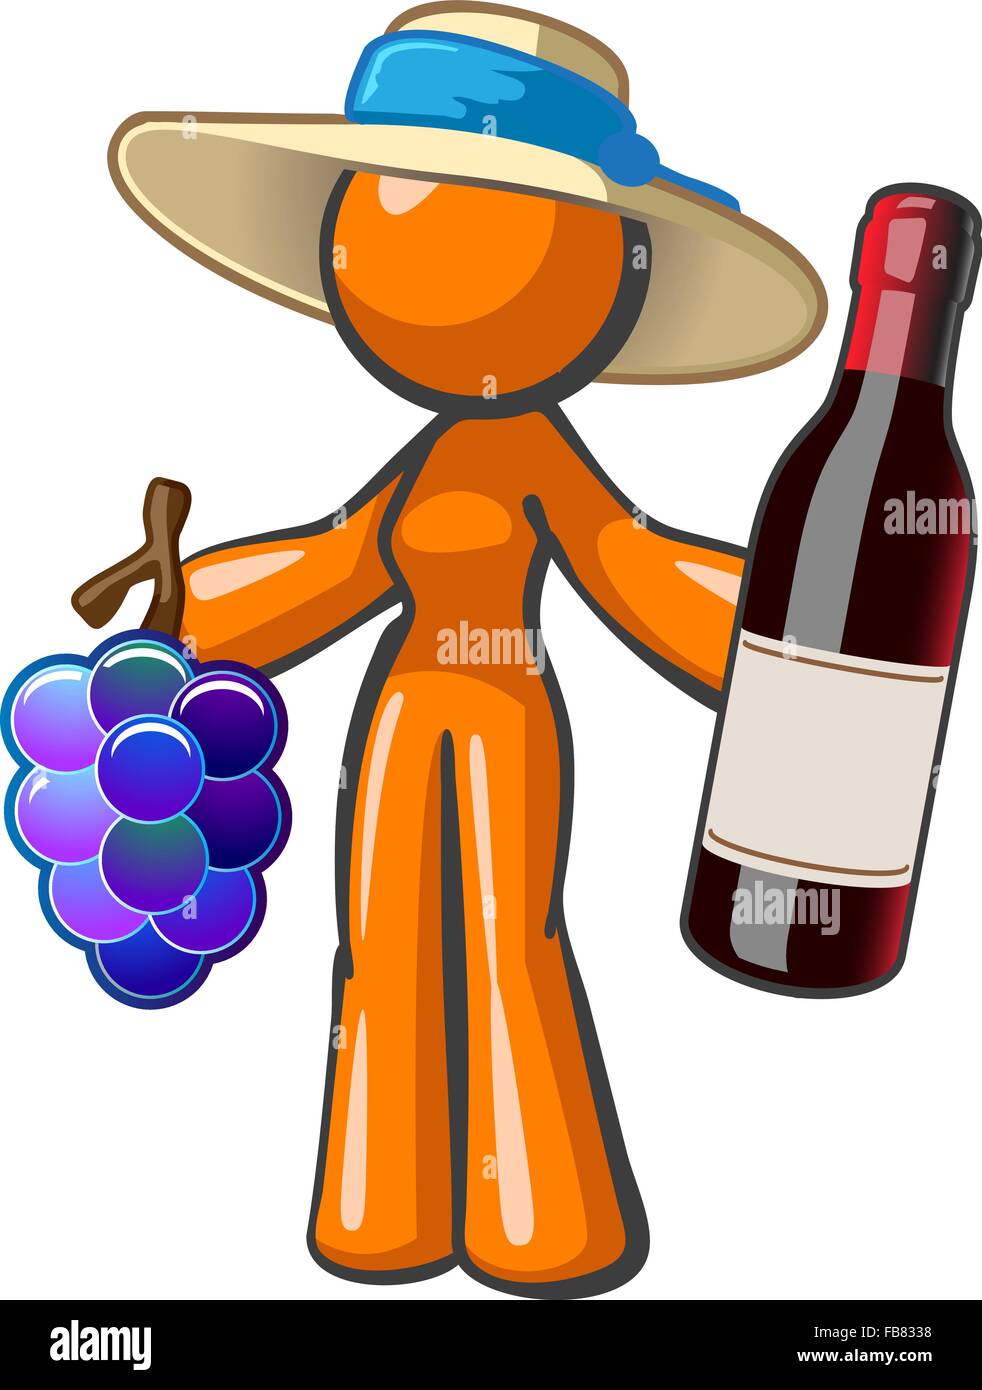 Orange lady holding a large bottle of vintage wine with a blank label. She also has a large bunch of grapes and is wearing a vin. Stock Vector